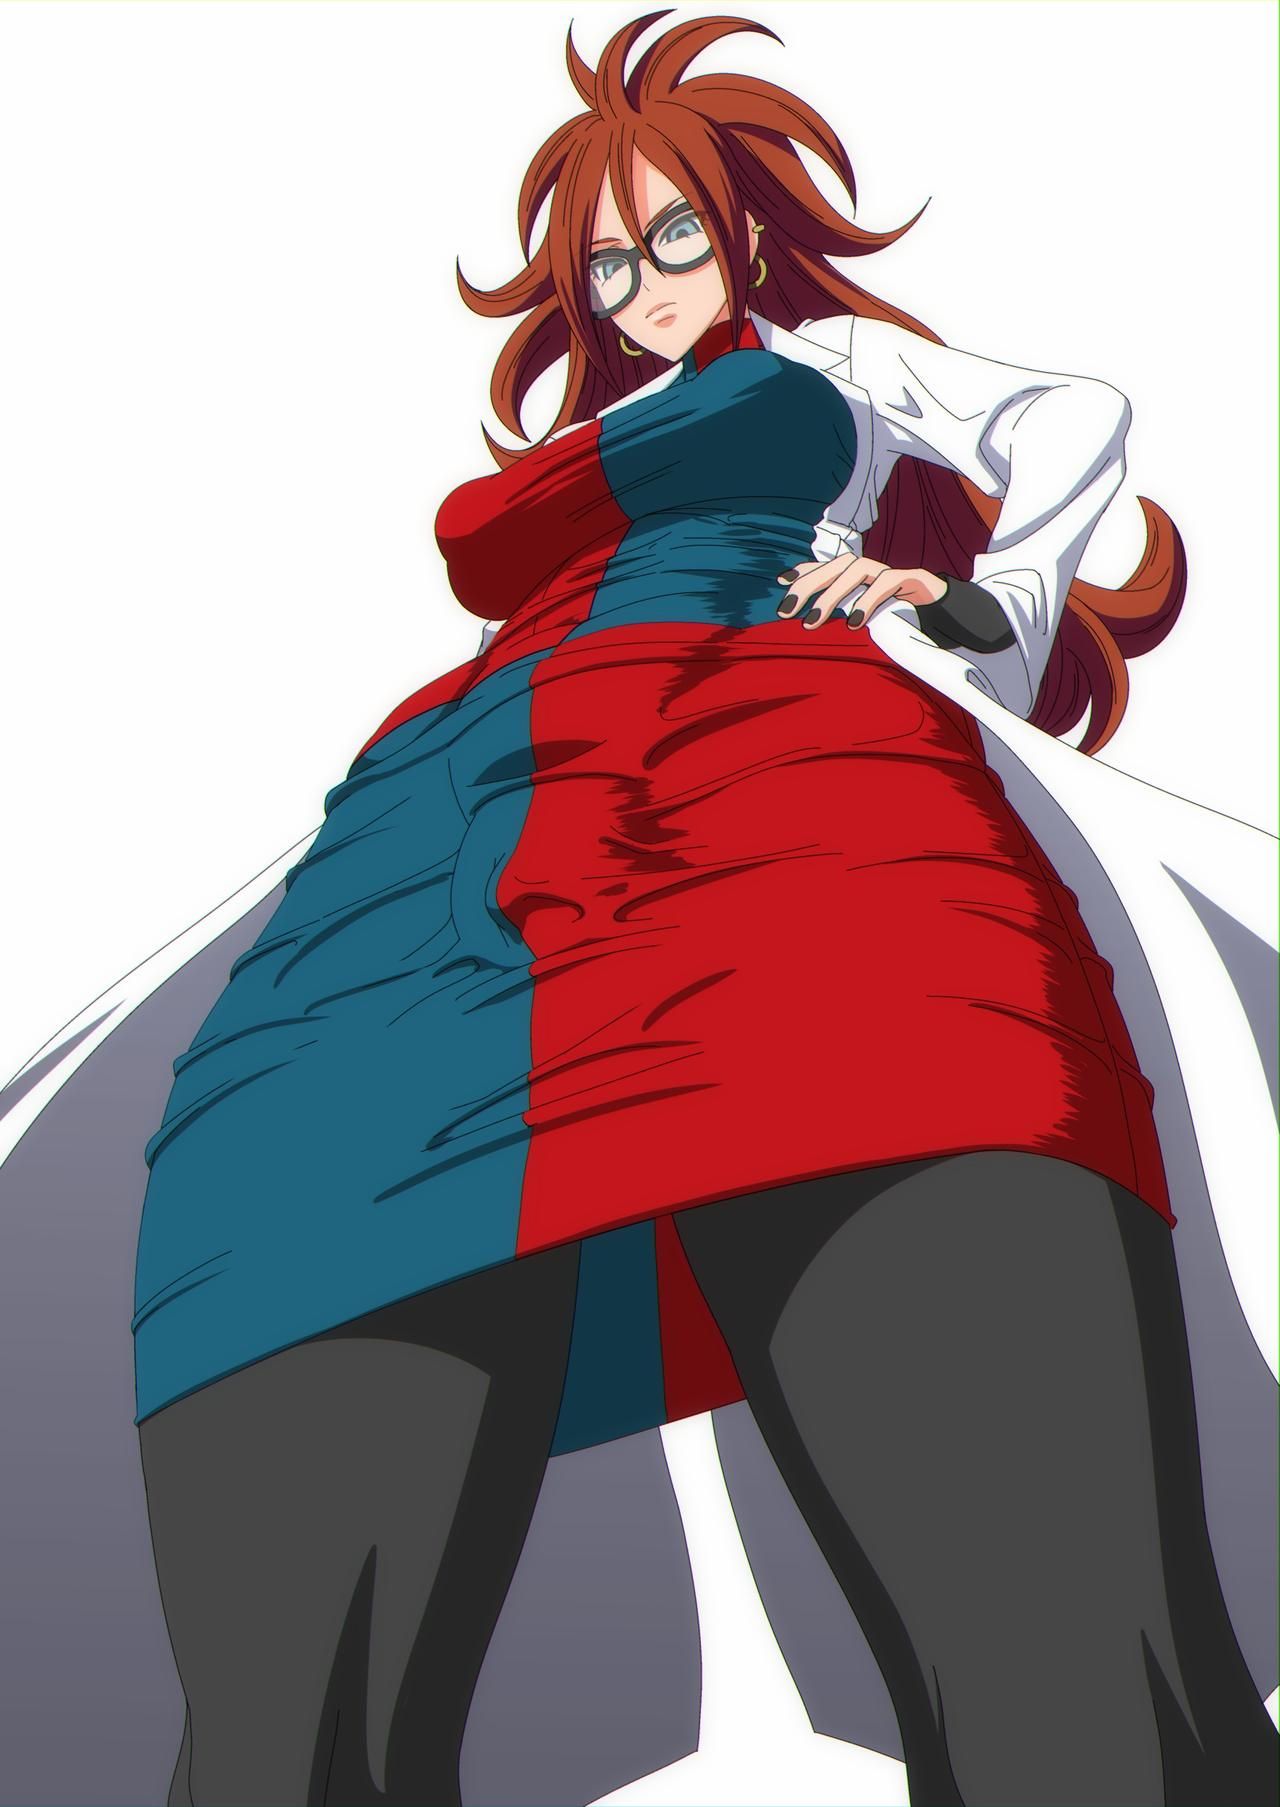 My Favorite Android 21 Pics 13